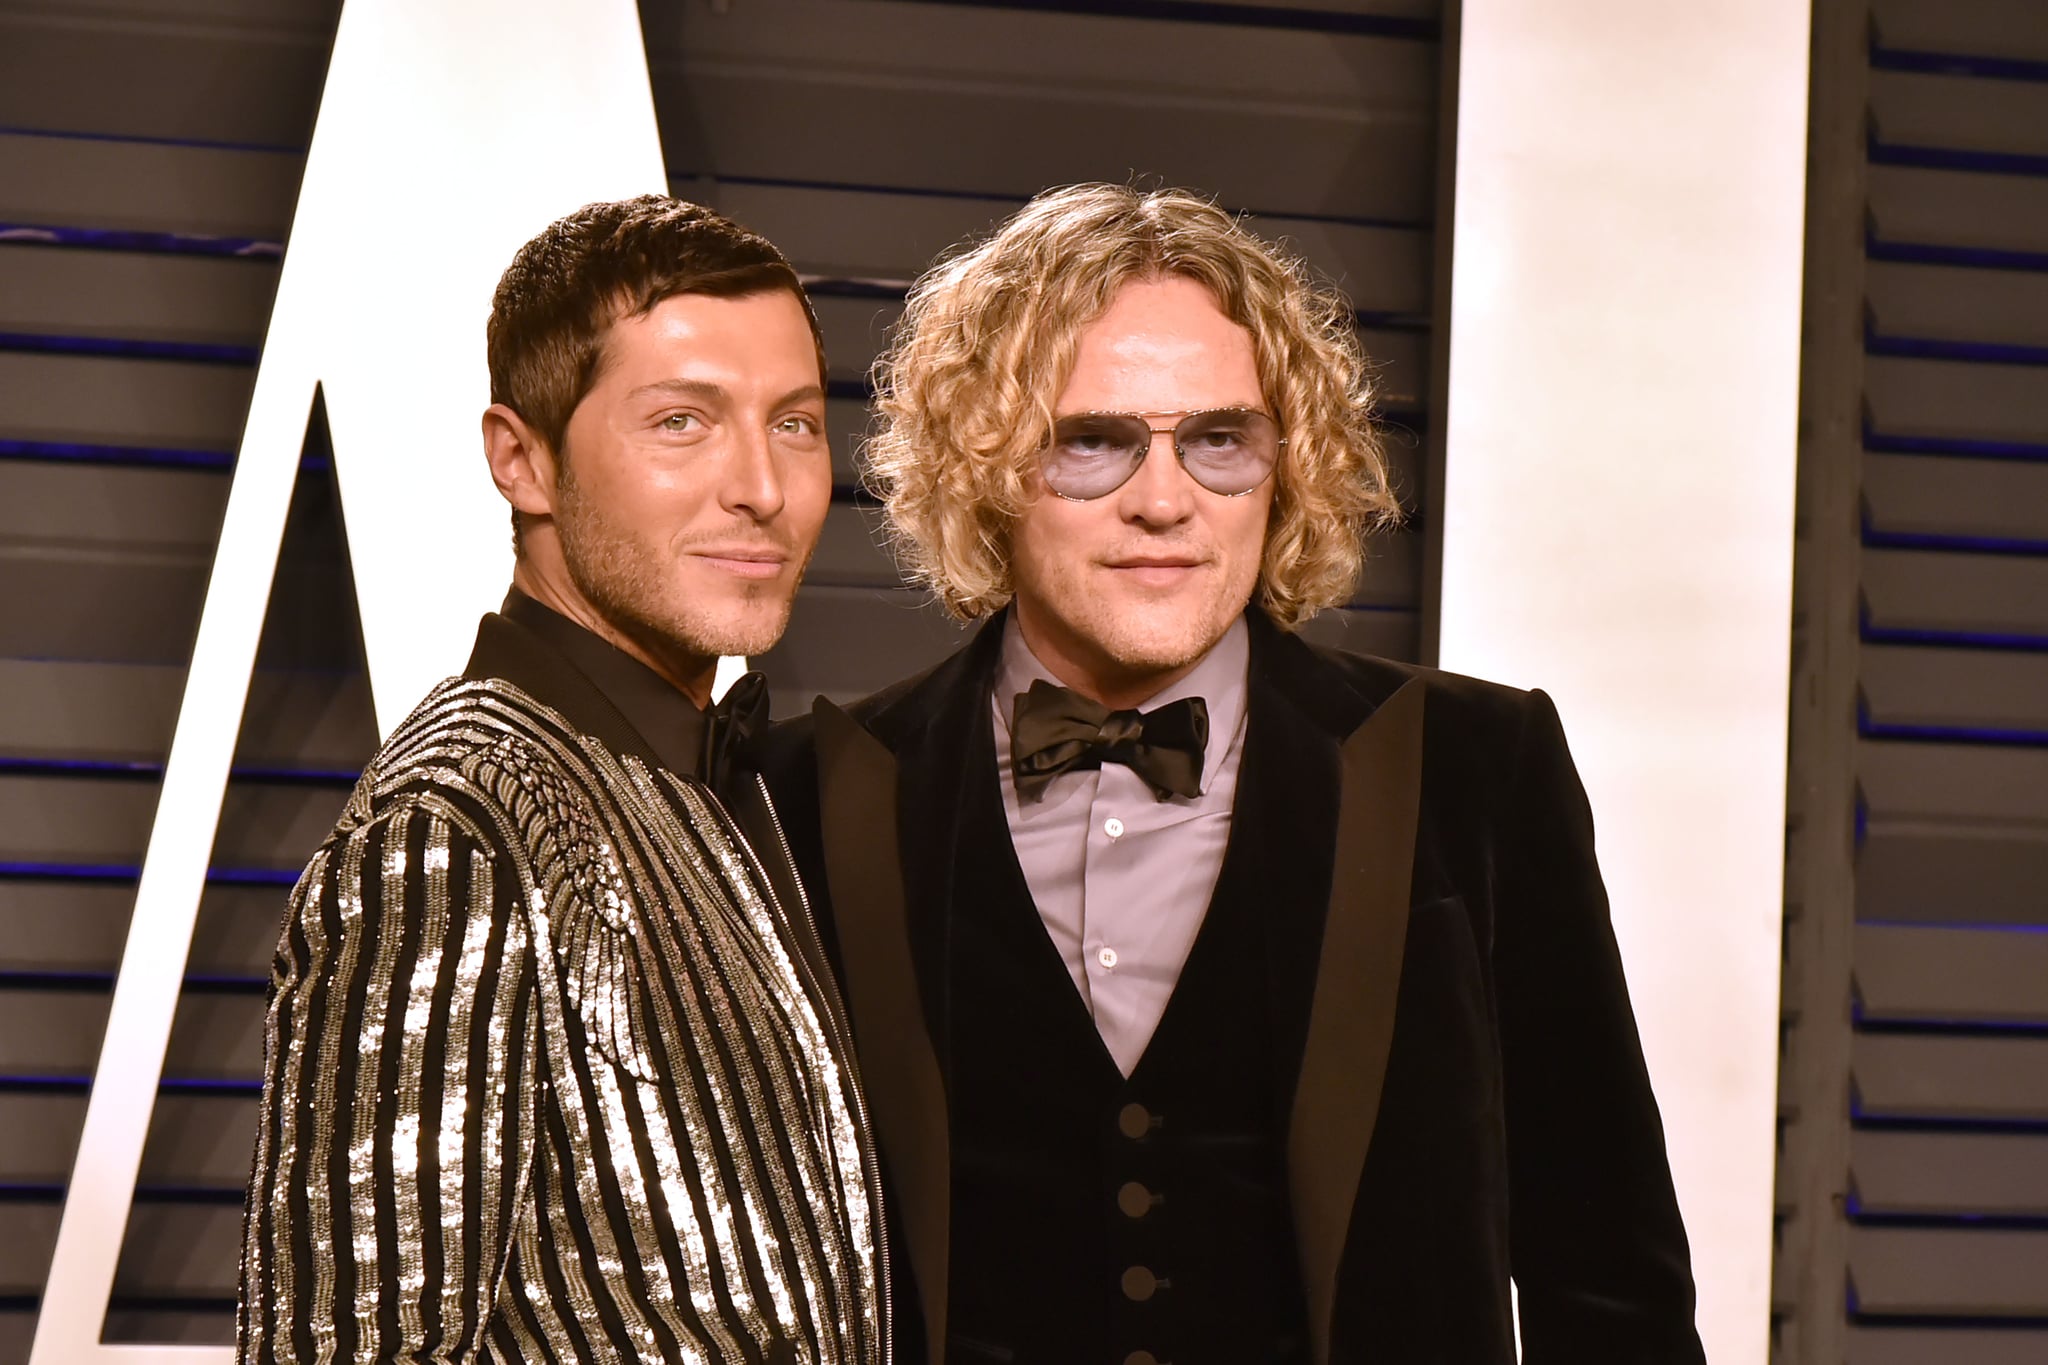 BEVERLY HILLS, CALIFORNIA - FEBRUARY 24: Peter Dundas and Evangelo Bousis attend the 2019 Vanity Fair Oscar Party at Wallis Annenberg Center for the Performing Arts on February 24, 2019 in Beverly Hills, California. (Photo by David Crotty/Patrick McMullan via Getty Images)